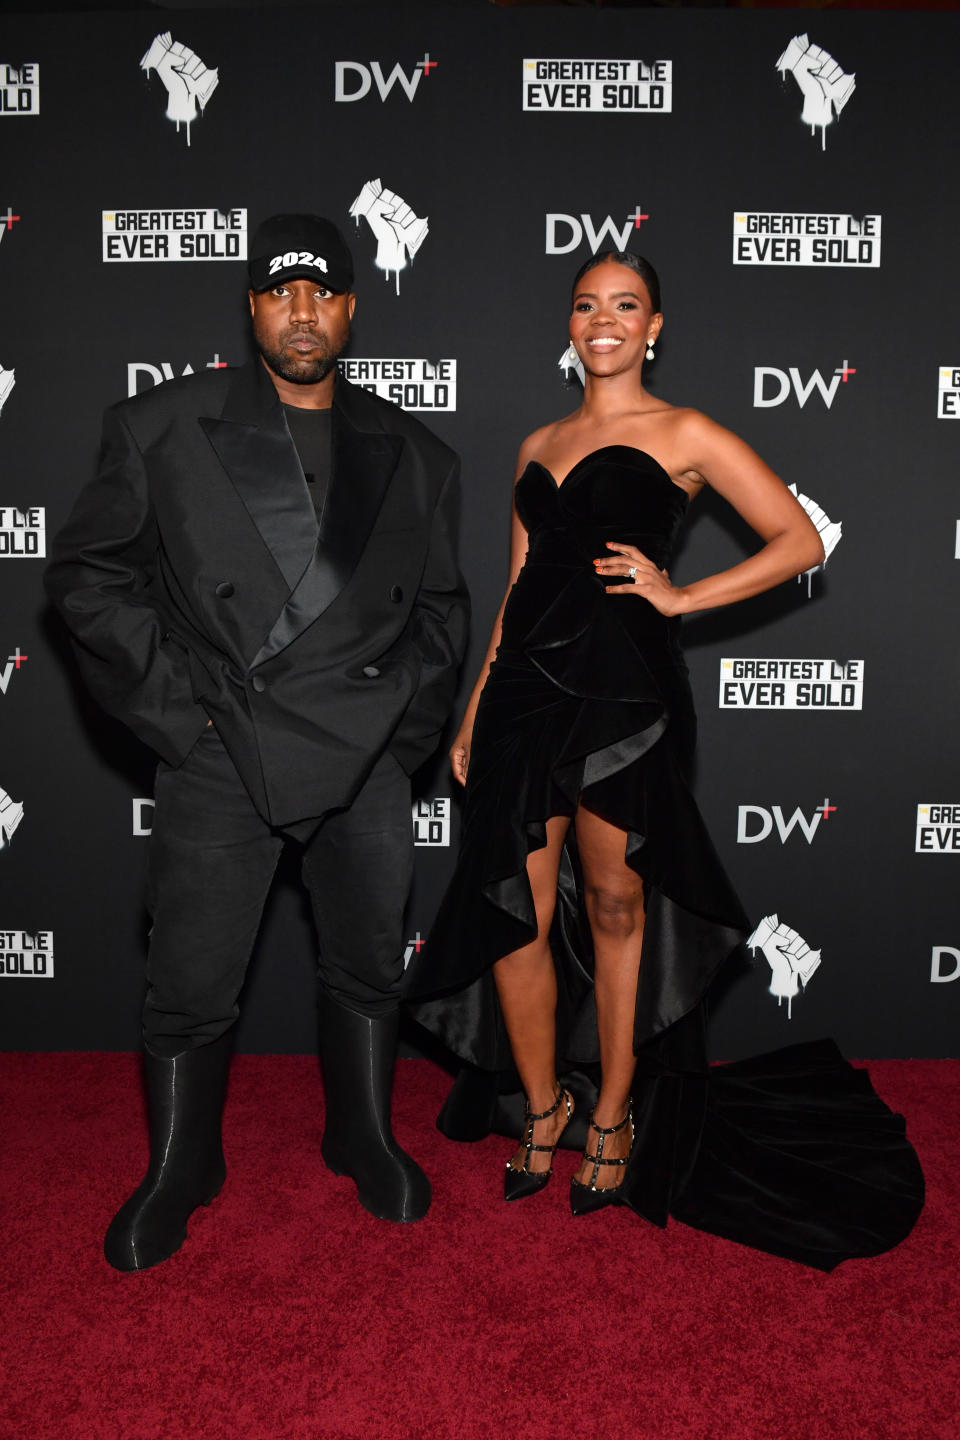 American rapper Kanye West and conservative pundit Candace Owens wearing black on the red carpet in Nashville, TN.